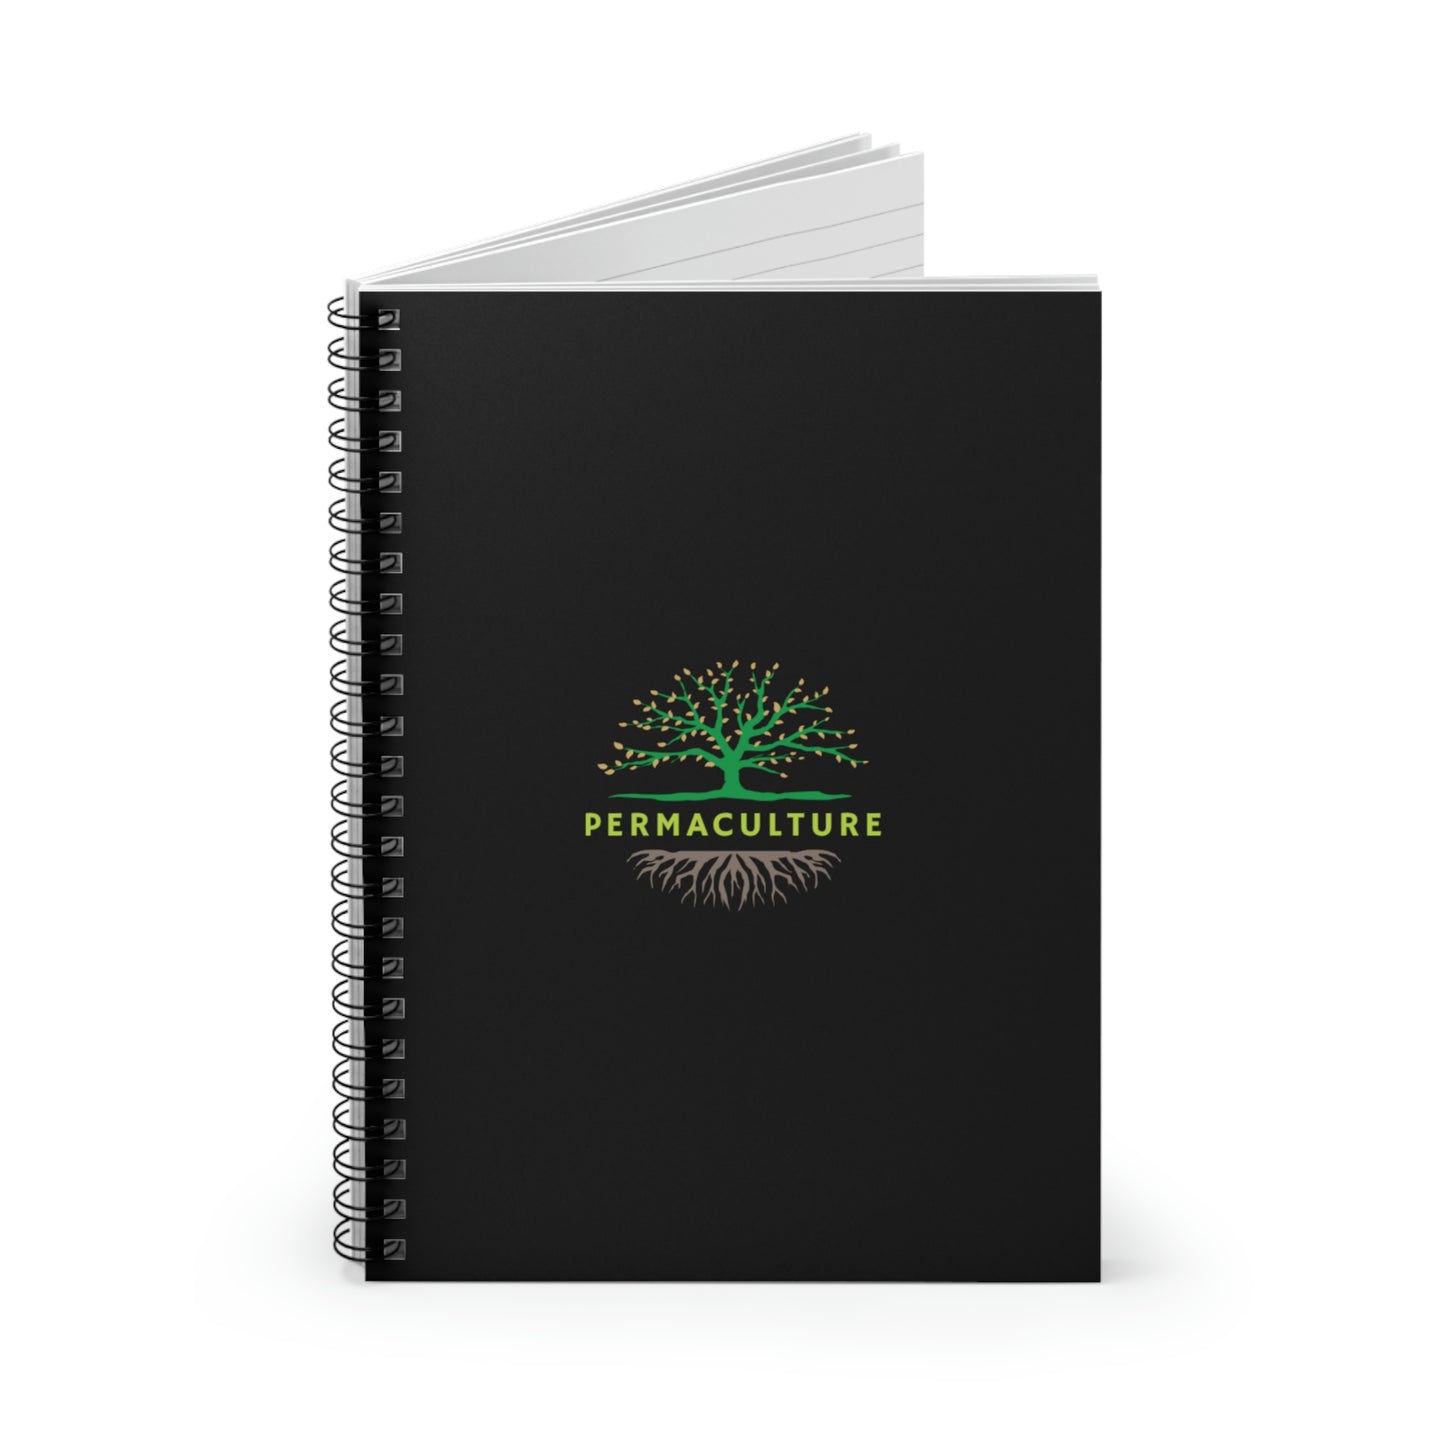 Permaculture - Spiral Notebook - Ruled Line - Black Cover